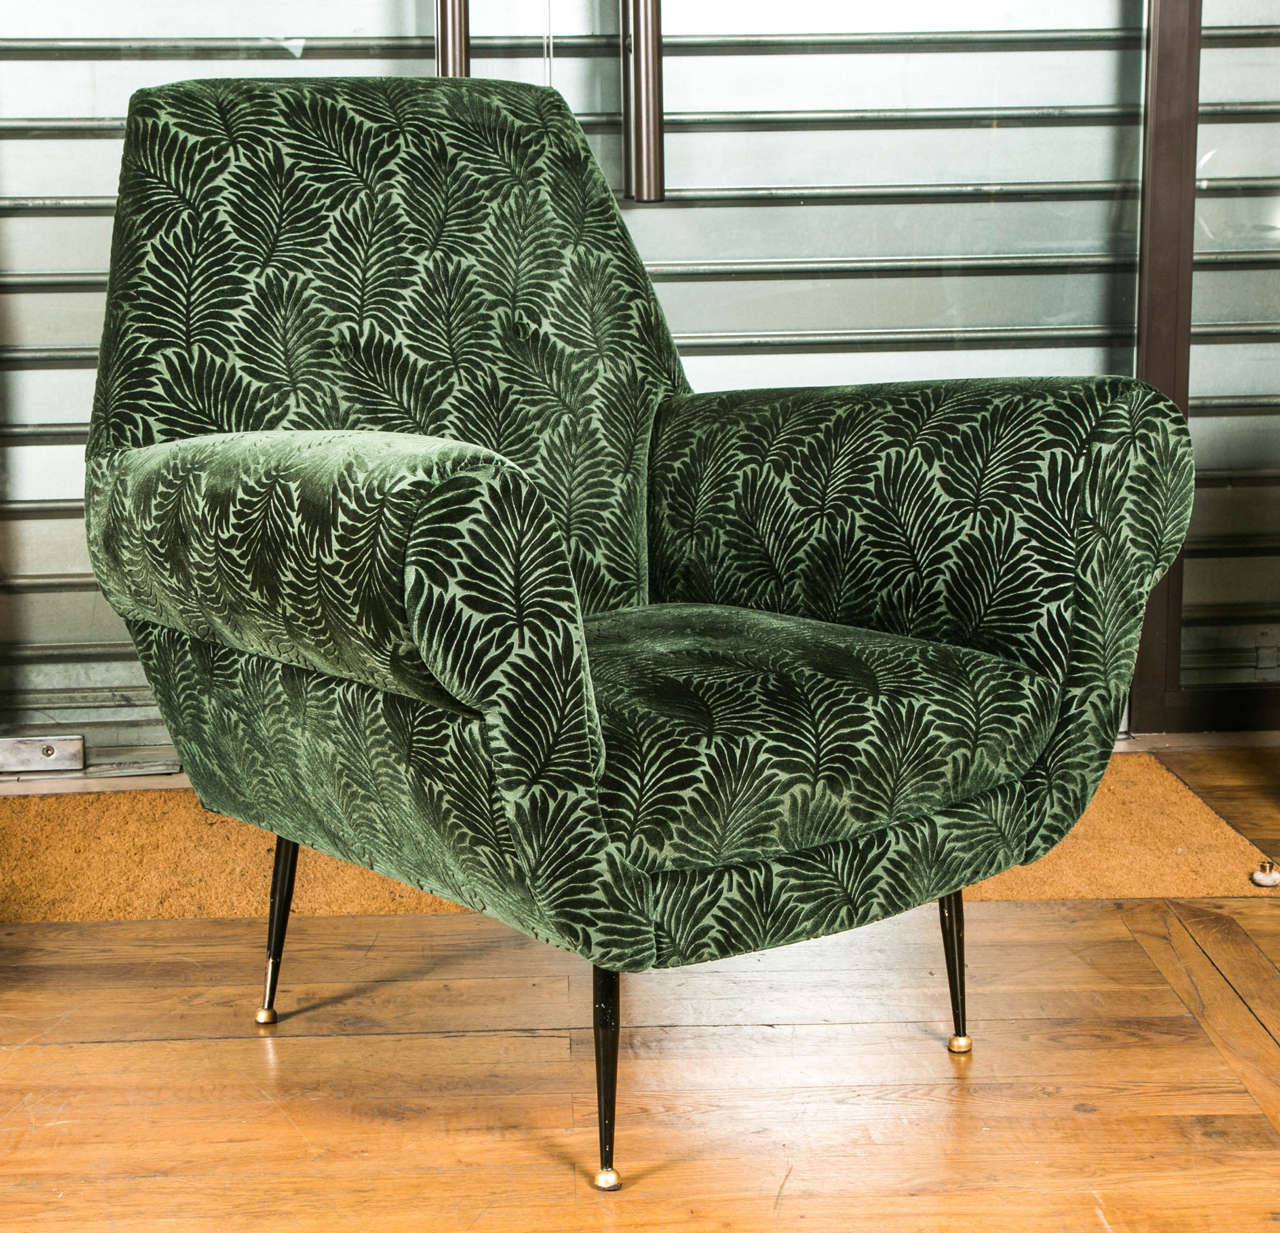 Italian Mid-Century Modern armchairs, newly upholstered with green fabric, four lacquered steel and brass feet, by Gigi Radice.